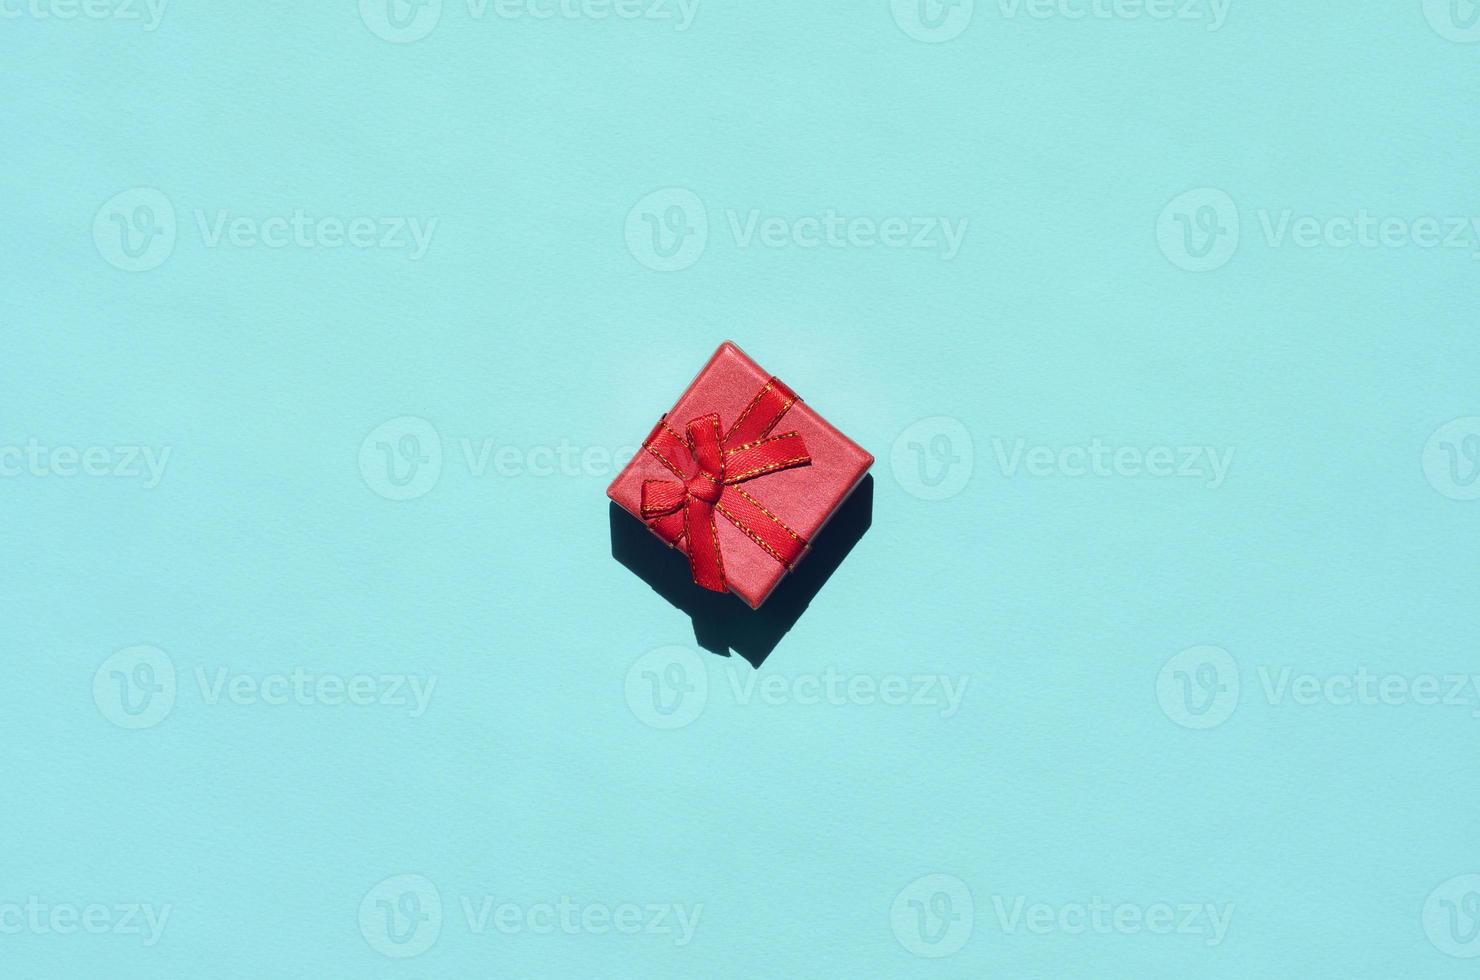 Small red pink gift box lie on texture background of fashion trendy pastel blue color paper in minimal concept photo